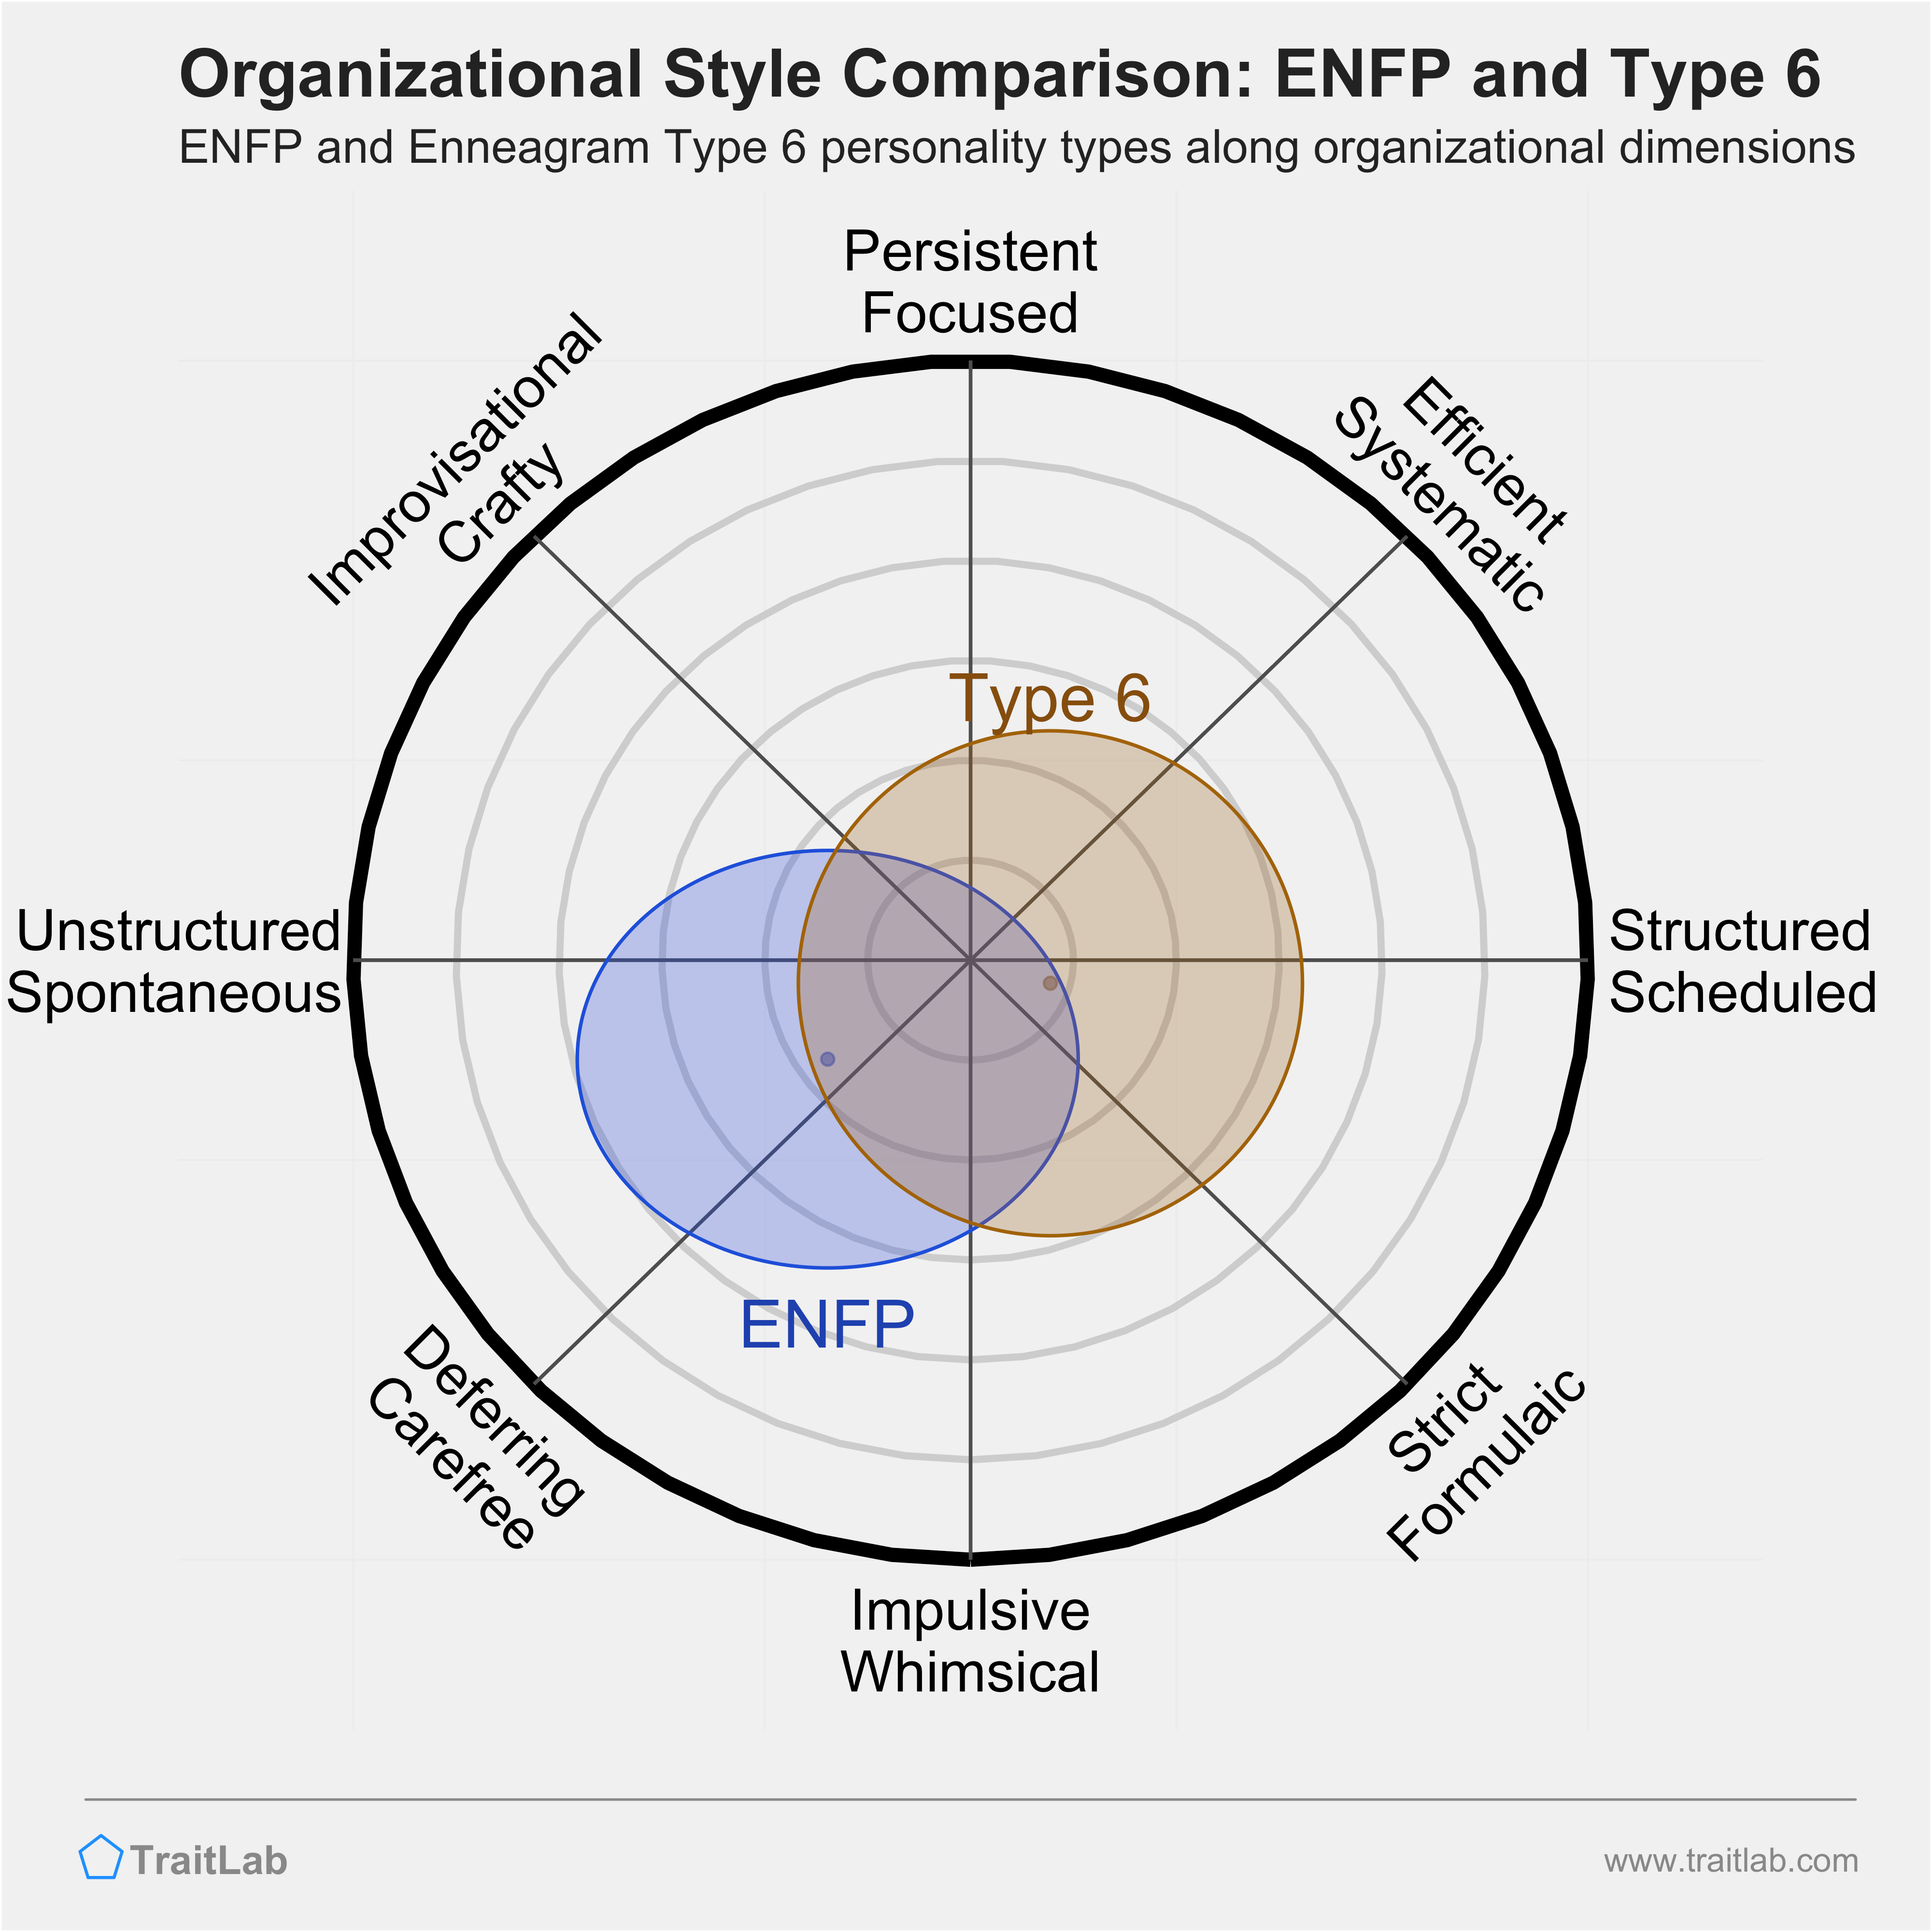 ENFP and Type 6 comparison across organizational dimensions